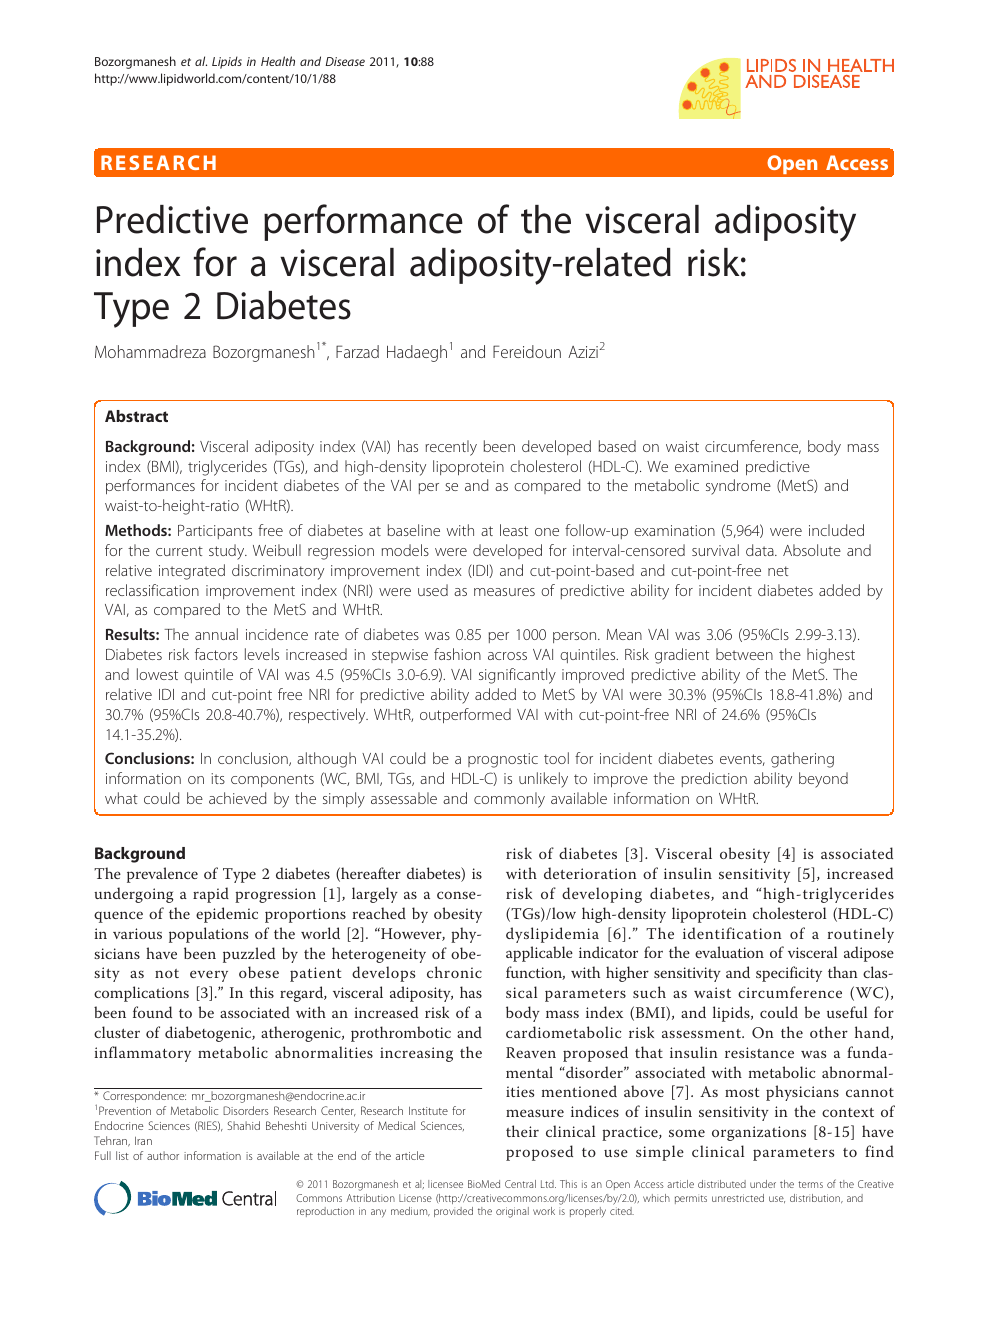 Predictive of the visceral adiposity index for a visceral adiposity-related risk: Type 2 Diabetes – topic of research paper in Clinical medicine. Download scholarly article PDF and read for free